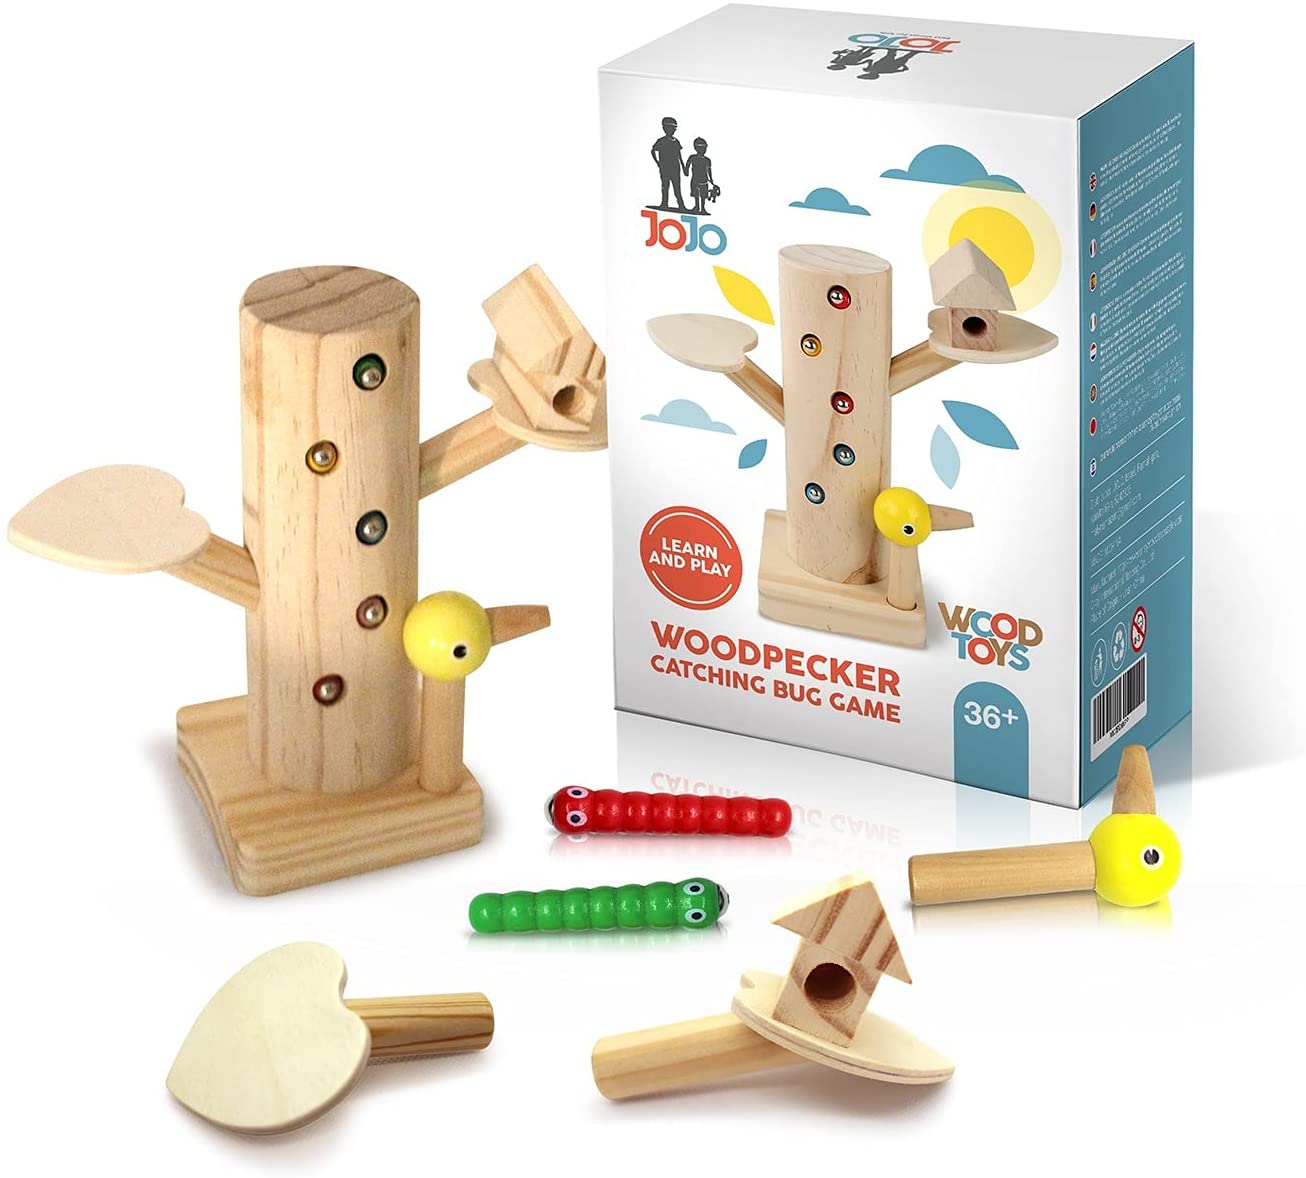 Wooden Magnet Bird Bug Catching Game Early Educational Toy Toy for Kids Baby 